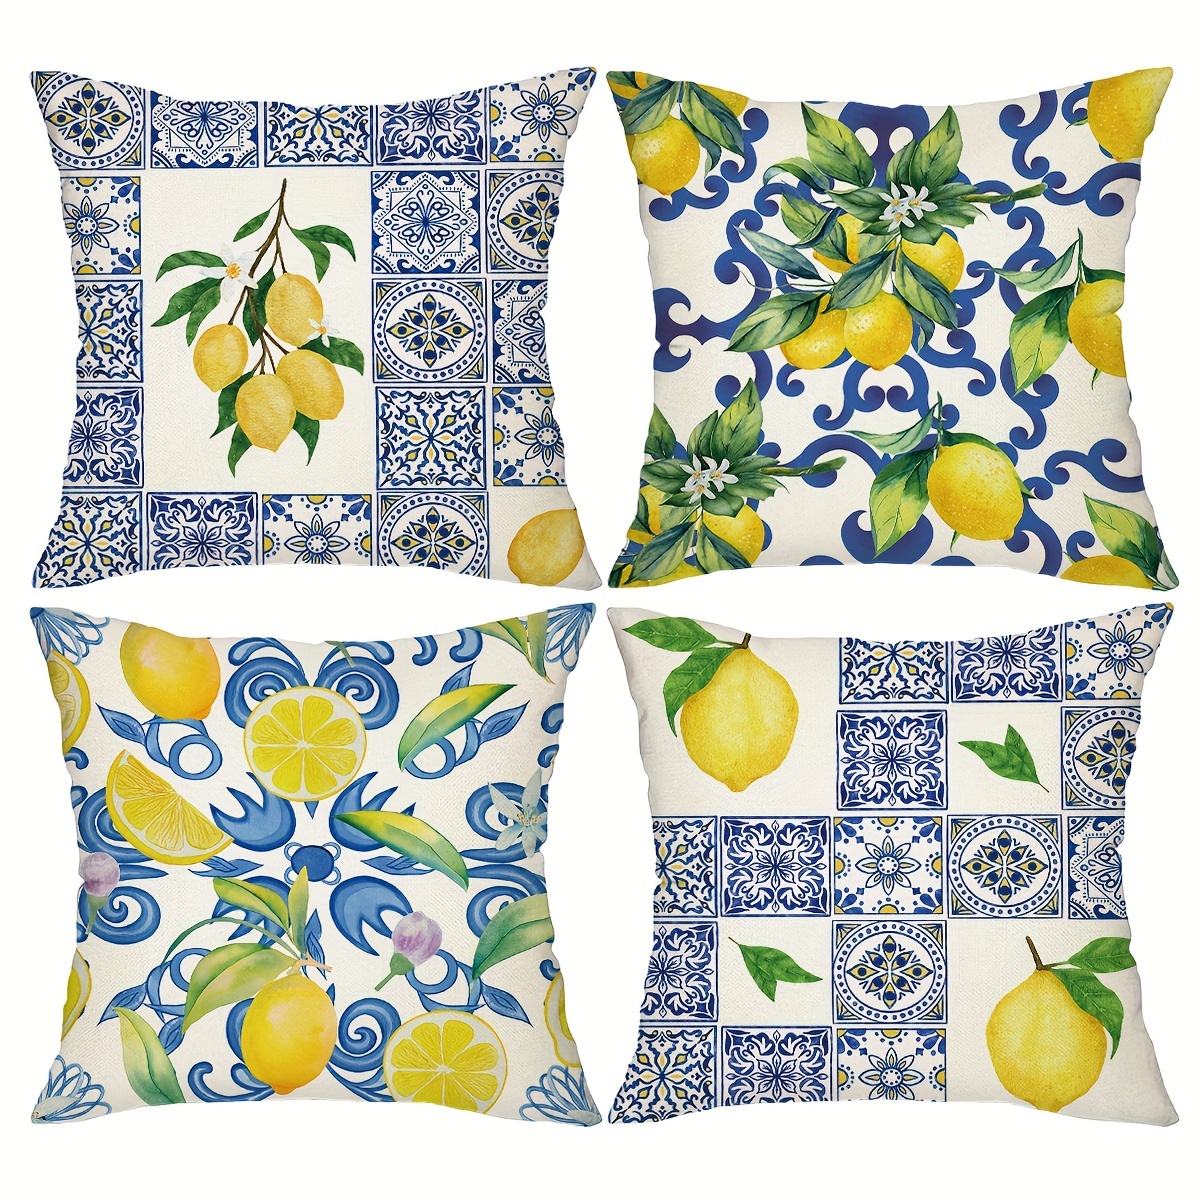 

4-pack Contemporary Lemon Patterned Linen Blend Throw Pillow Covers 18x18 Inch, Machine Washable With Zipper Closure For Sofa, Car, Bedroom Decor - Baroque Lemons And Ceramic Tiles Design